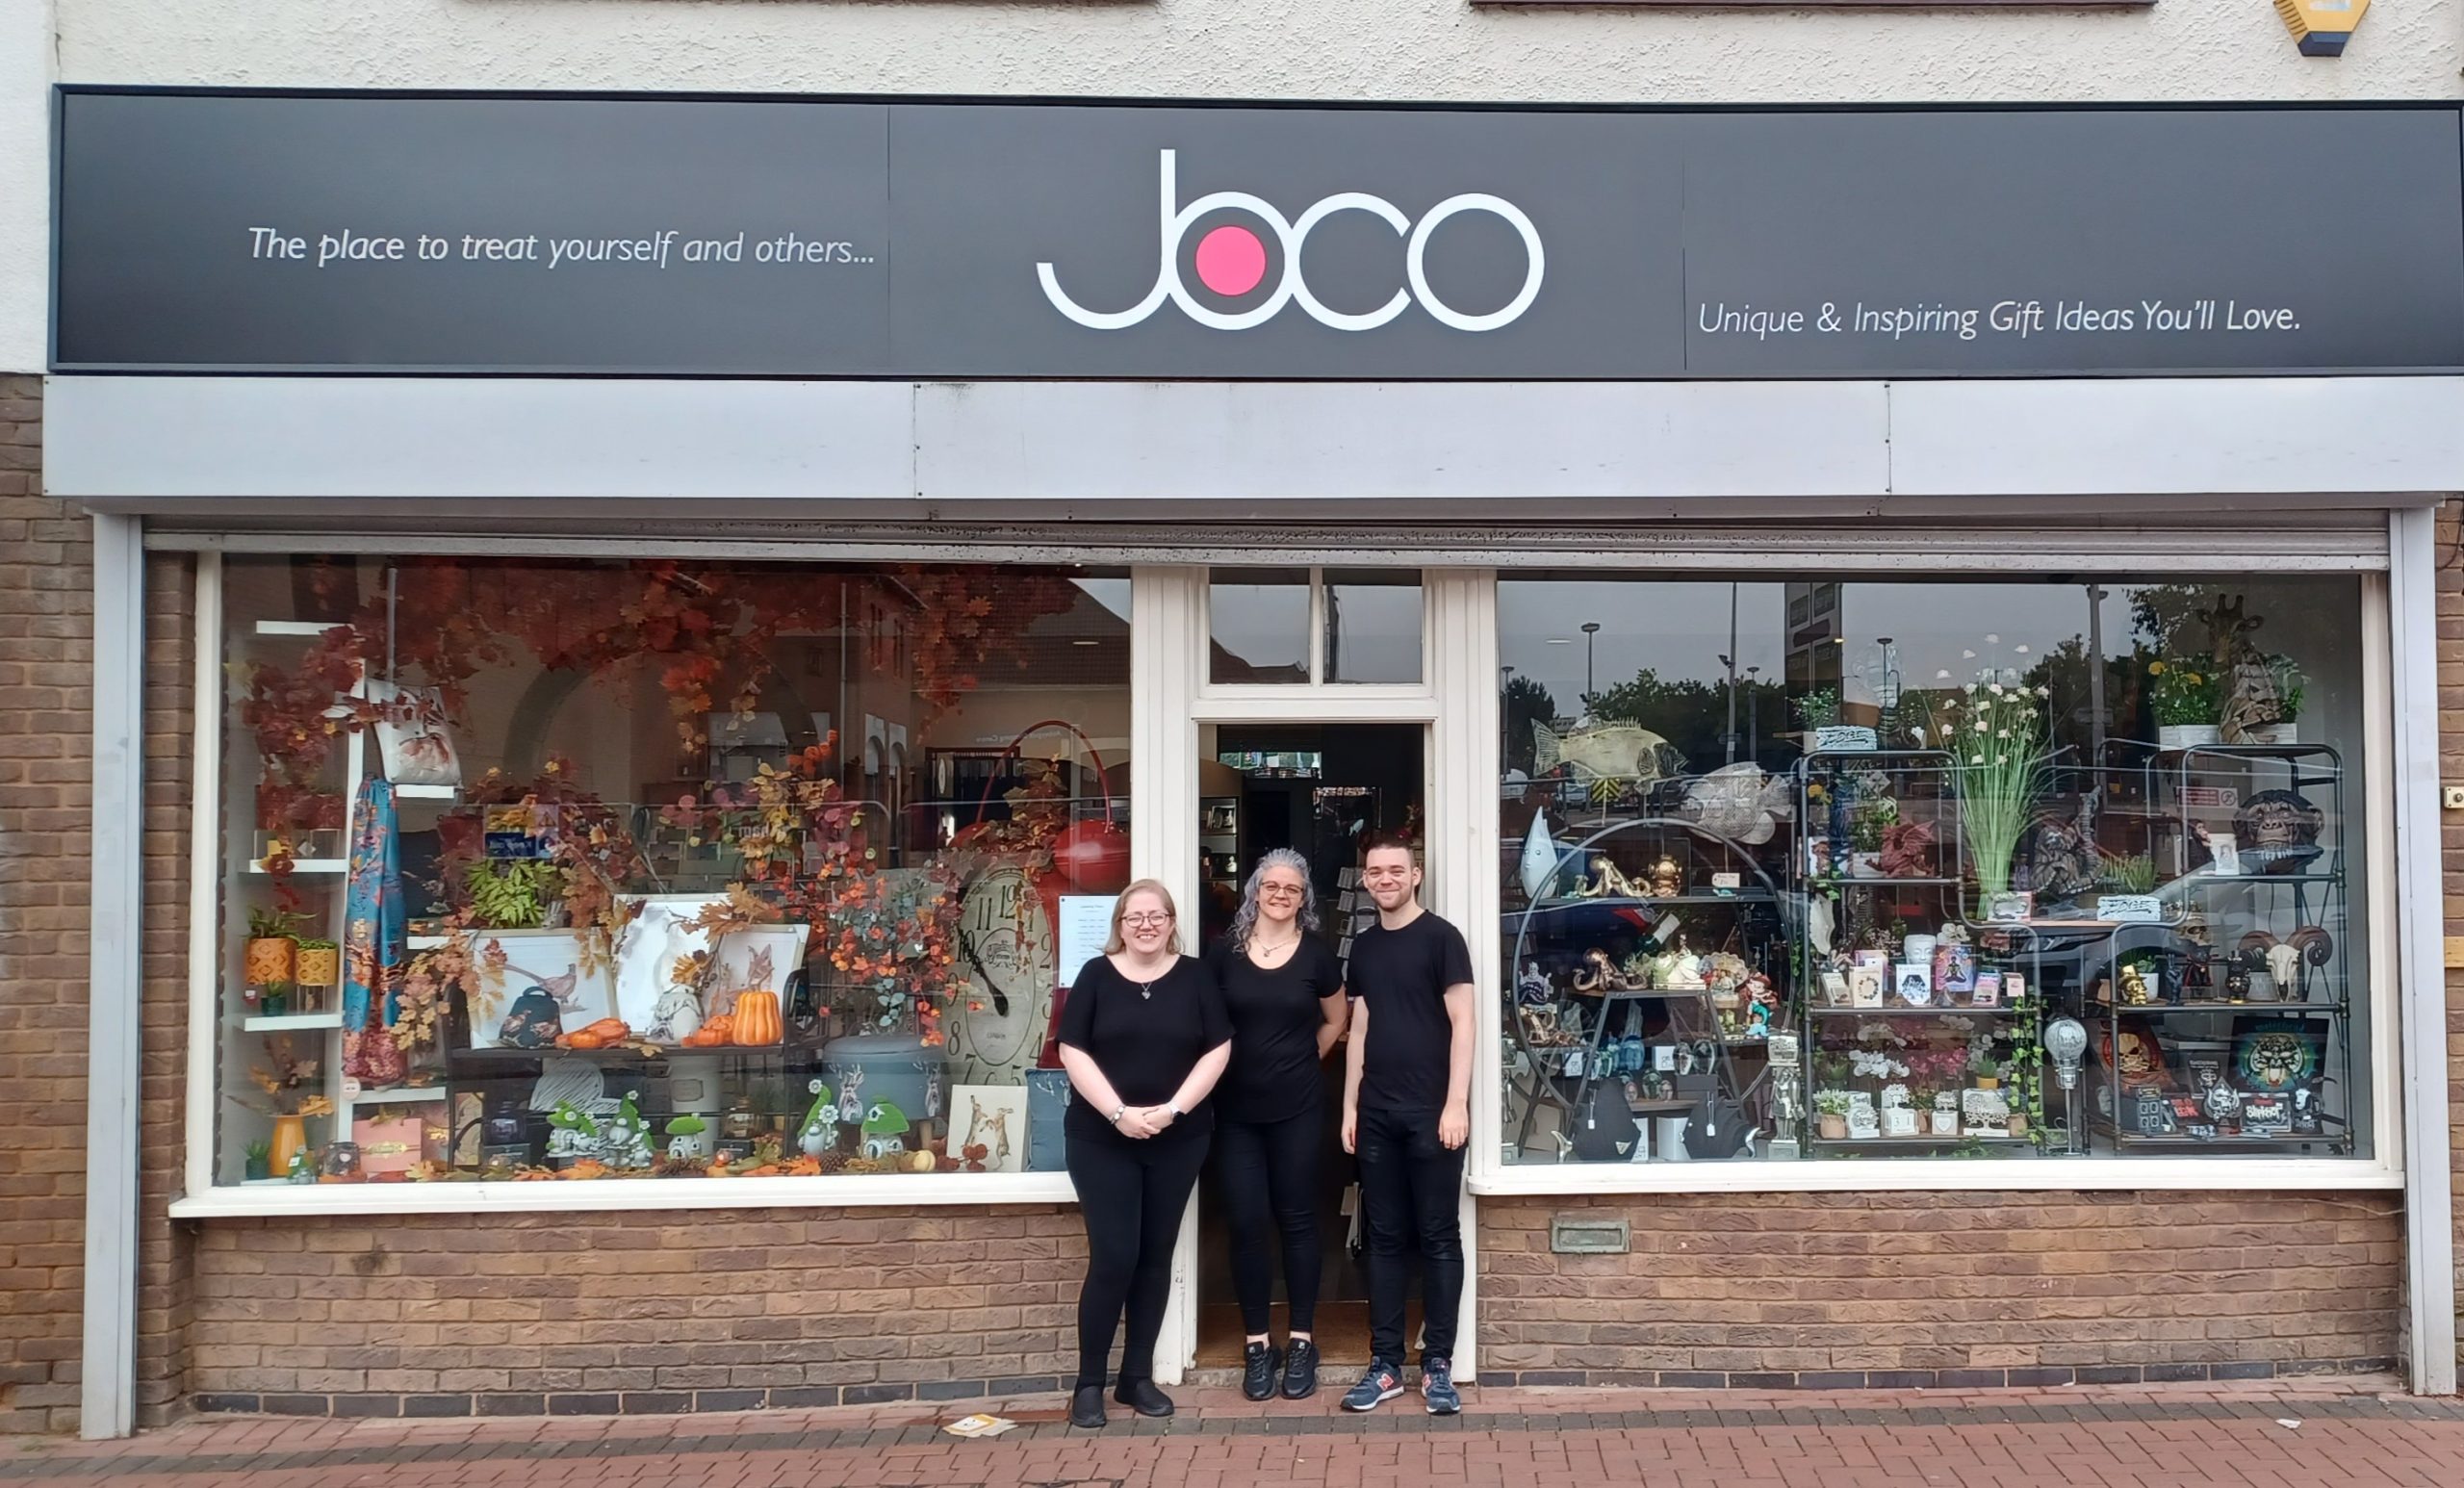 Above: Jo Williams runs Joco Interiors and took on a second business in lockdown